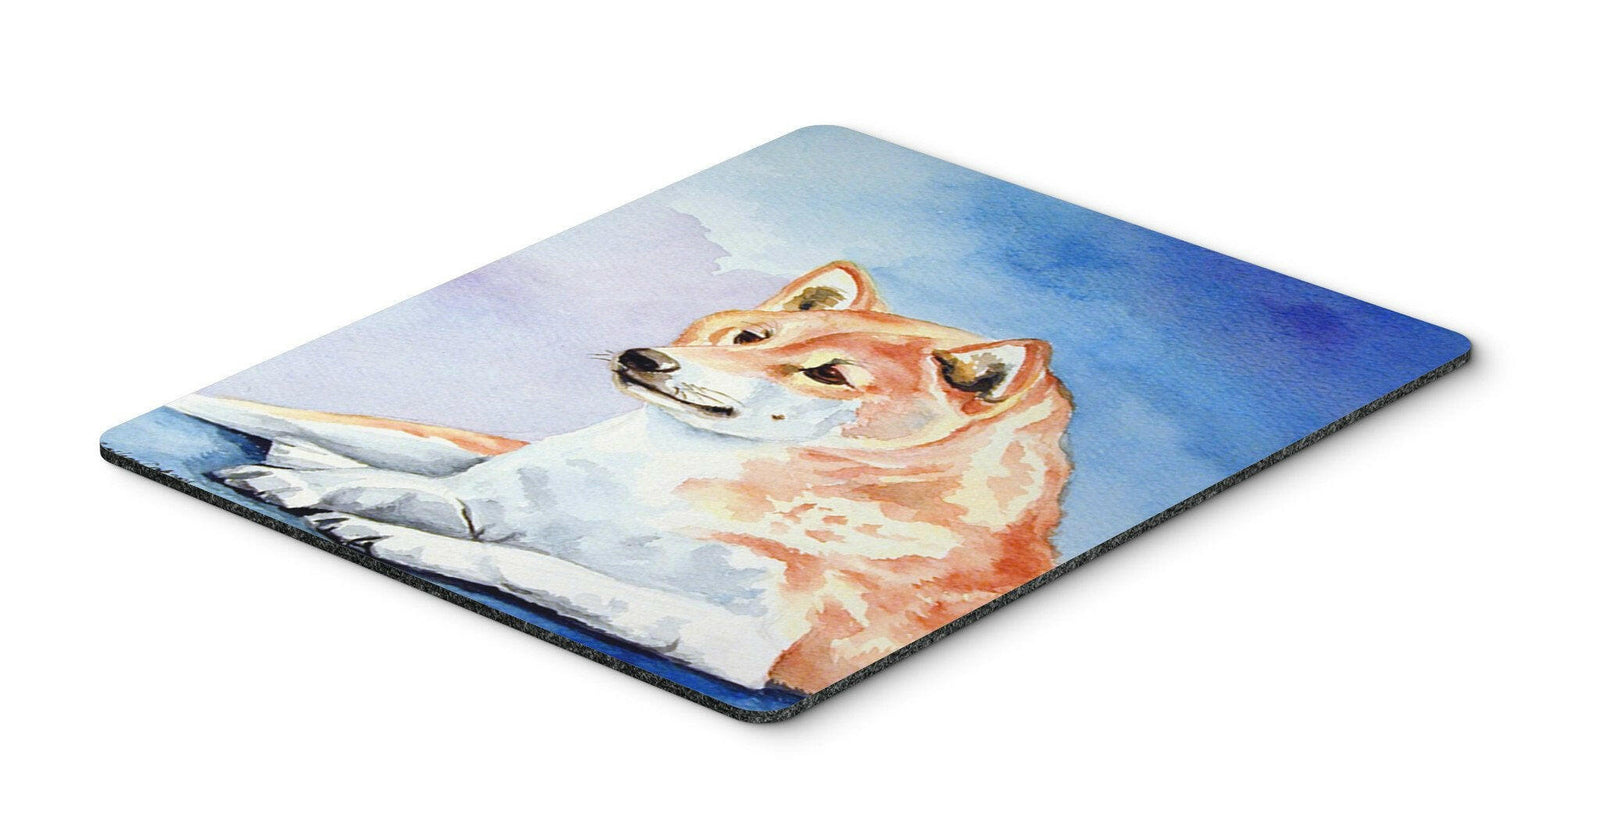 Red and White Shiba Inu Mouse Pad / Hot Pad / Trivet by Caroline's Treasures